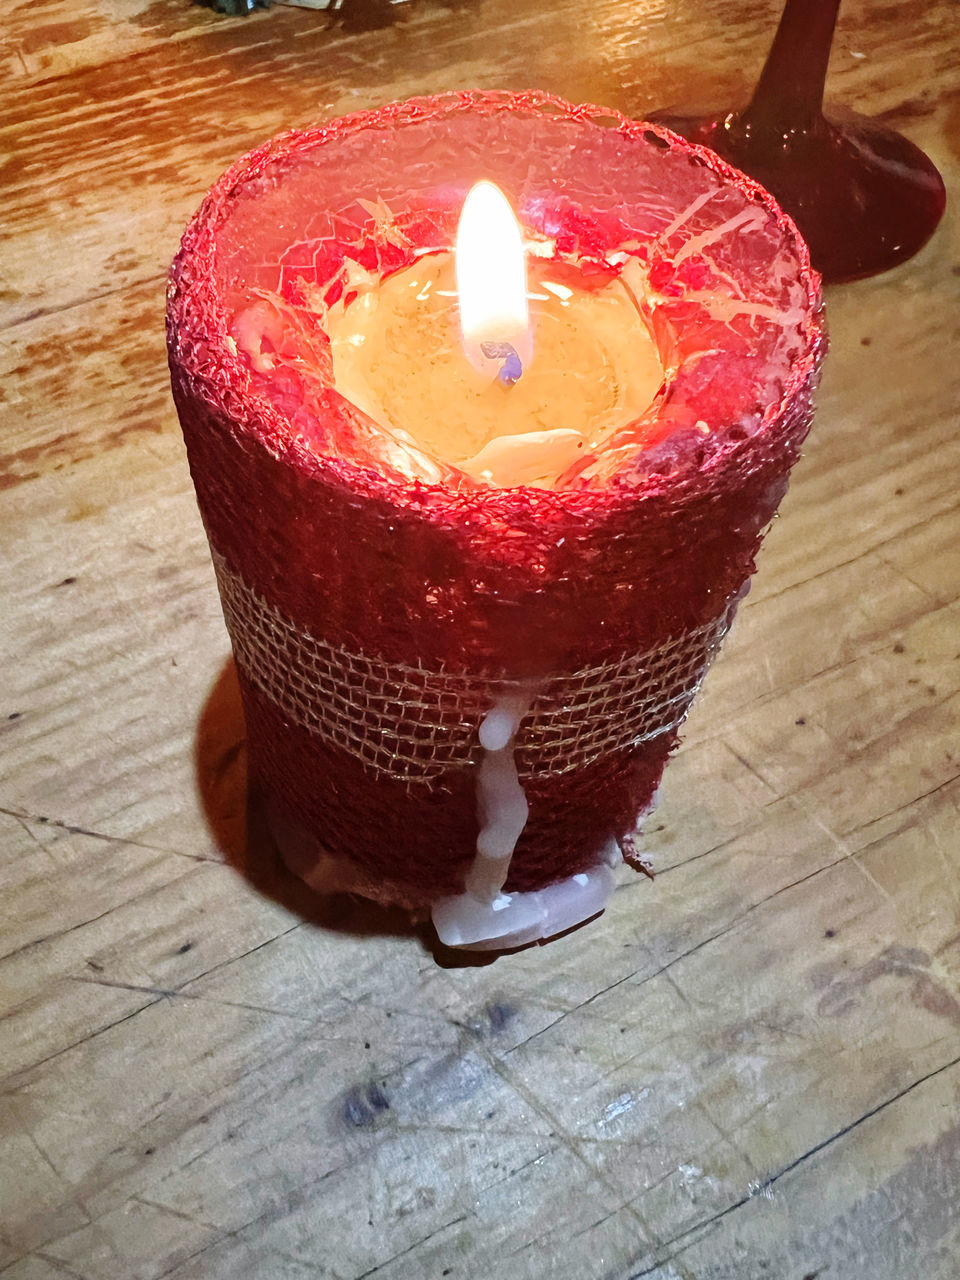 candle, flame, fire, burning, red, wood, heat, lighting, table, indoors, high angle view, nature, no people, close-up, food and drink, illuminated, pink, decoration, glowing, food, celebration